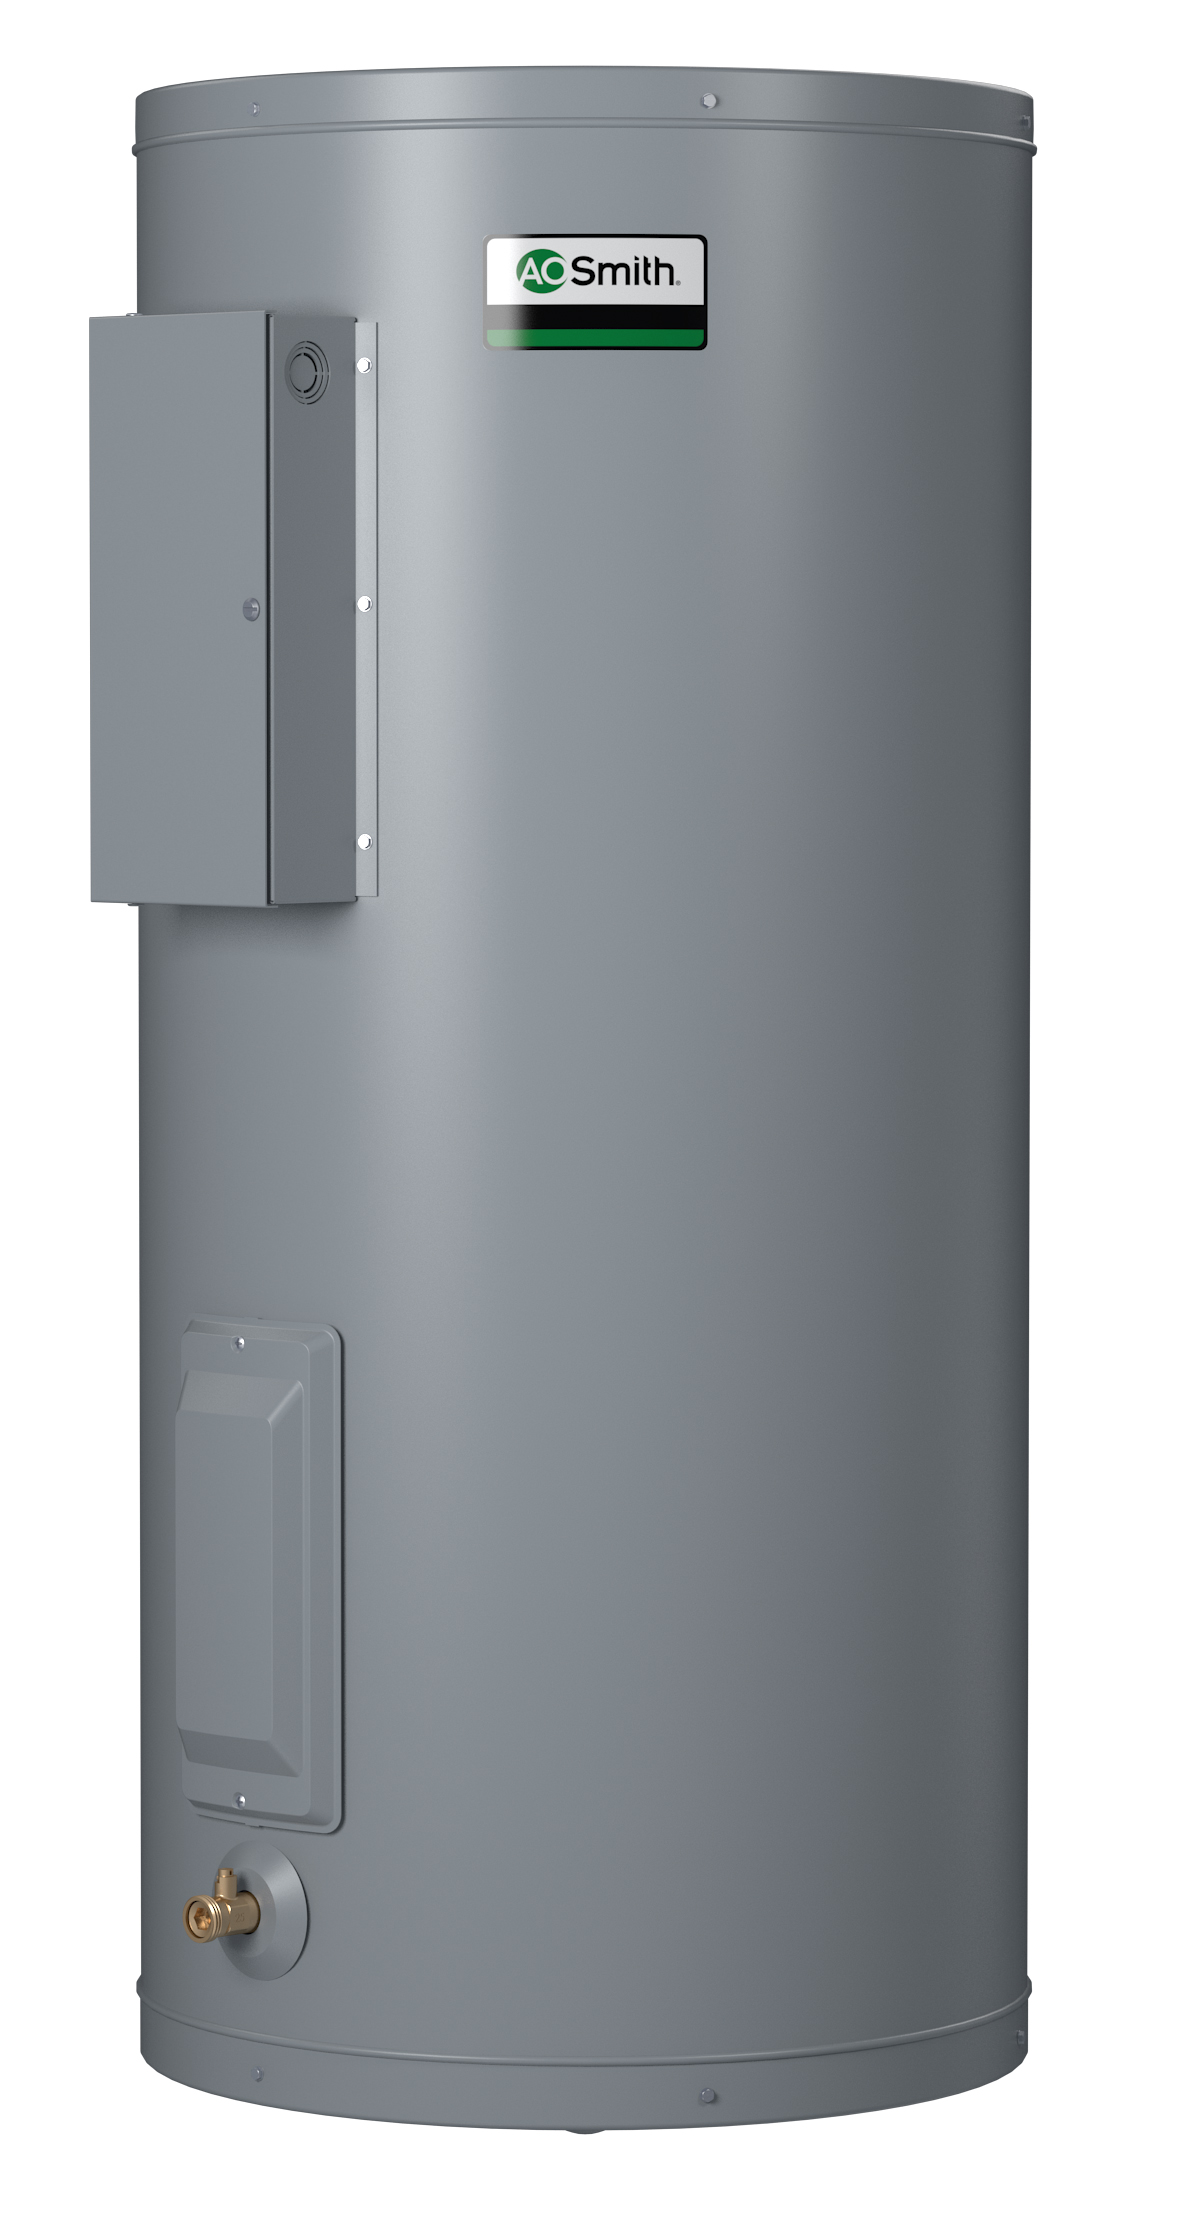 AO SMITH DEN-120D: 120 GALLONS, 10.0KW, 208 VOLT, 3 PHASE, (2-5000 WATT ELEMENTS, SIMULTANEOUS WIRING), DURA-POWER, LIGHT DUTY COMMERCIAL ELECTRIC WATER HEATER